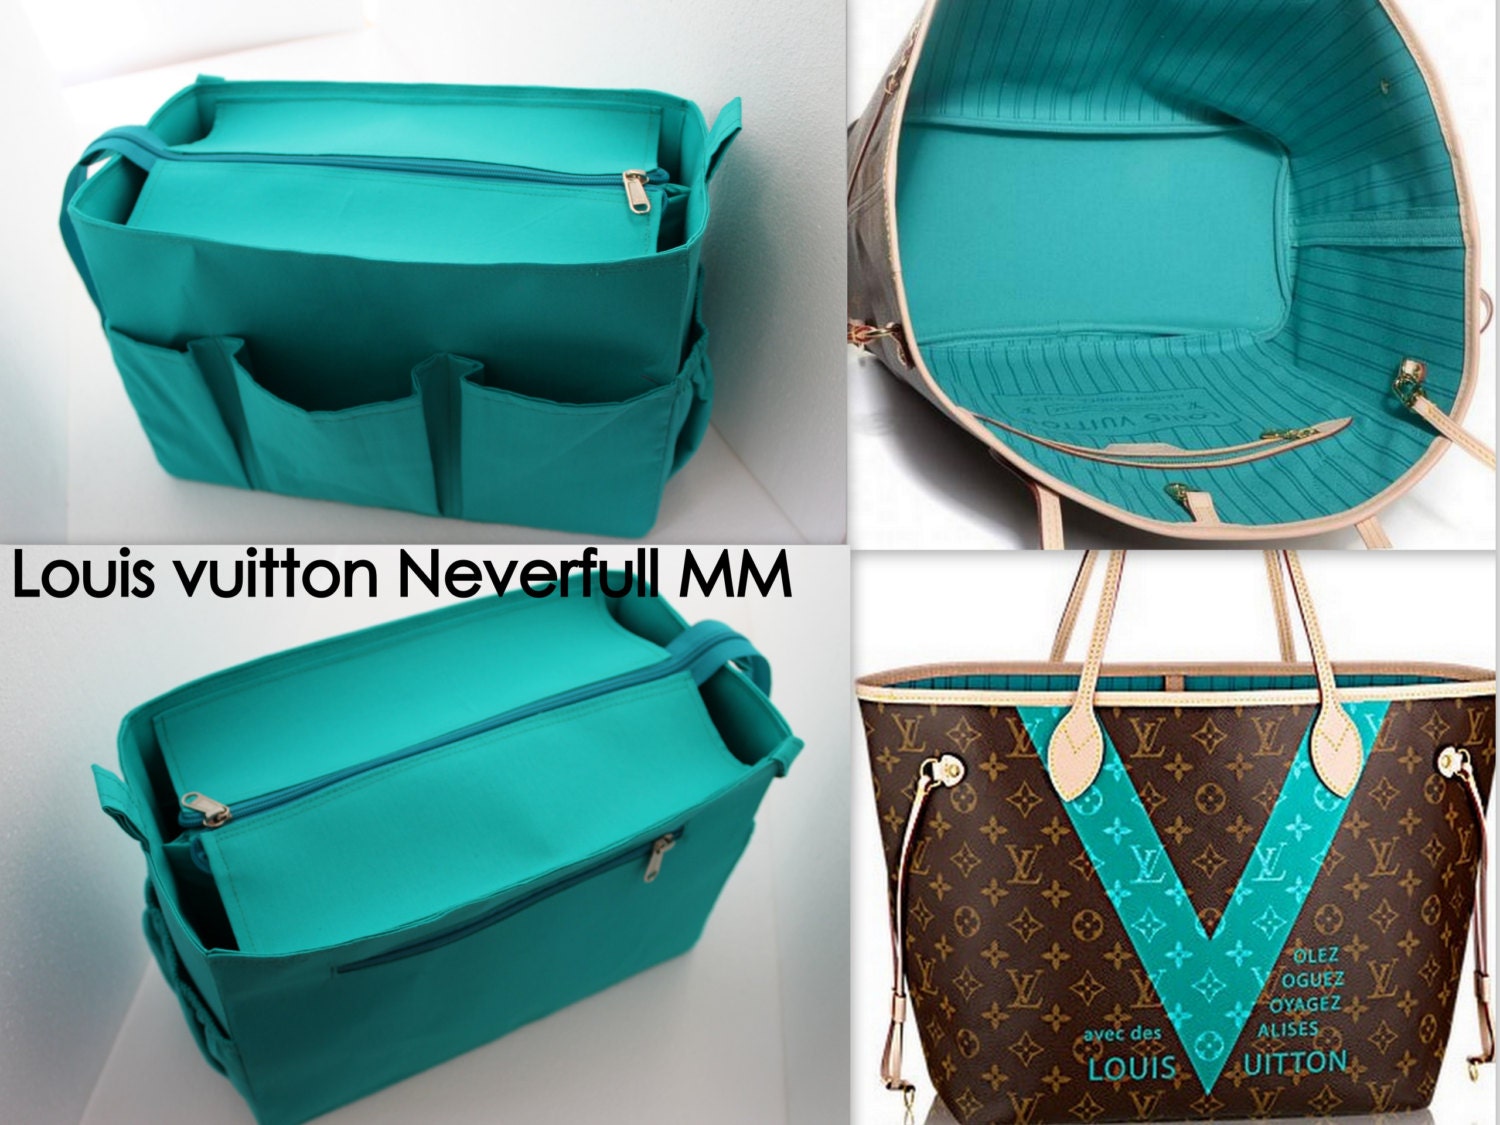 Taller Purse Organizer for Louis Vuitton Neverfull MM With 